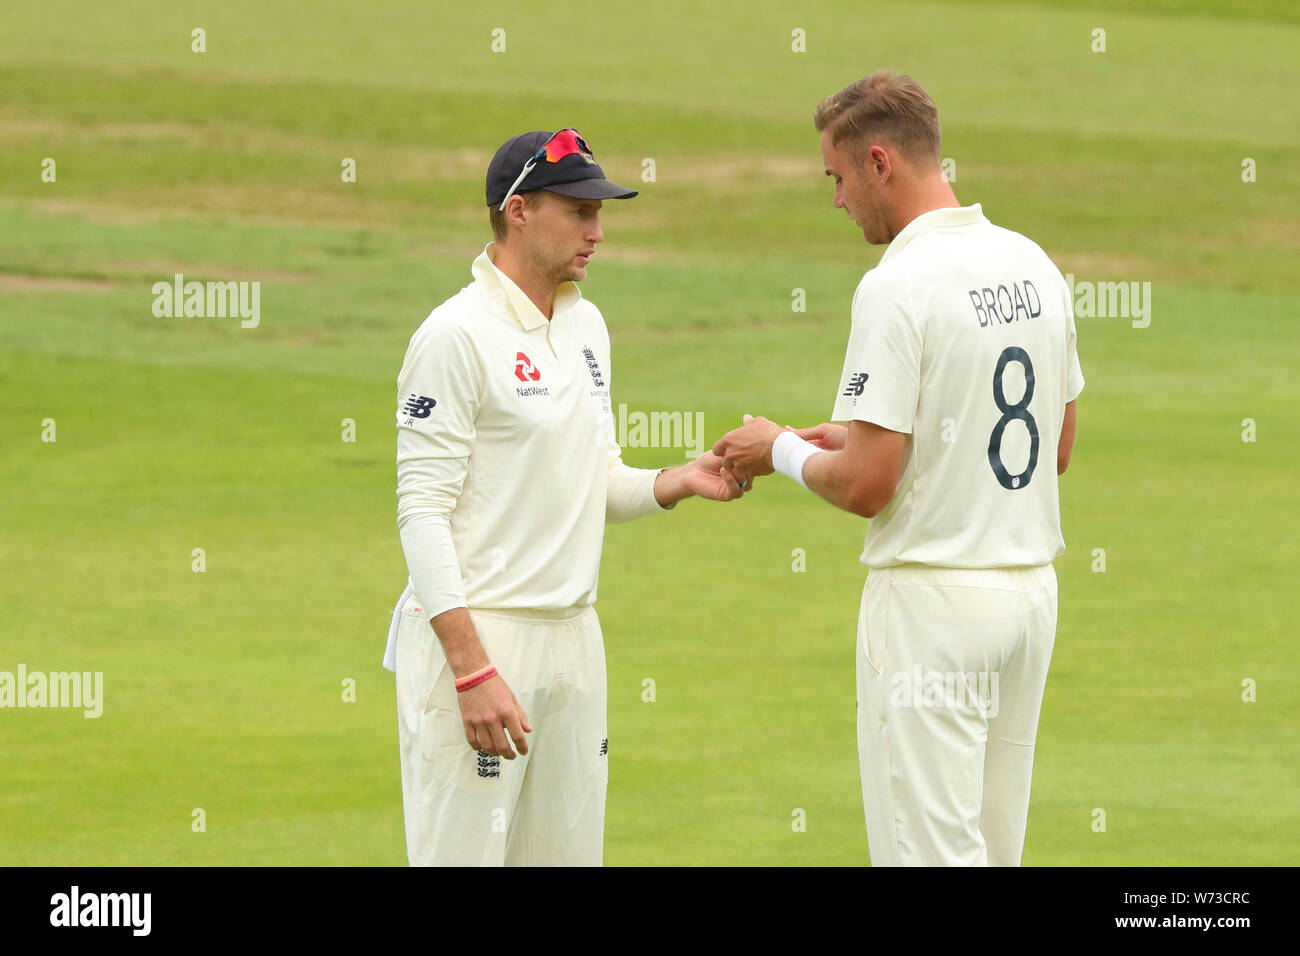 BIRMINGHAM, ENGLAND. 04 AUGUST 2019: Joe Root and Stuart Broad of England during day 3 of the 1st Specsavers Ashes Test Match, at Edgbaston Cricket Ground, Birmingham, England. Stock Photo